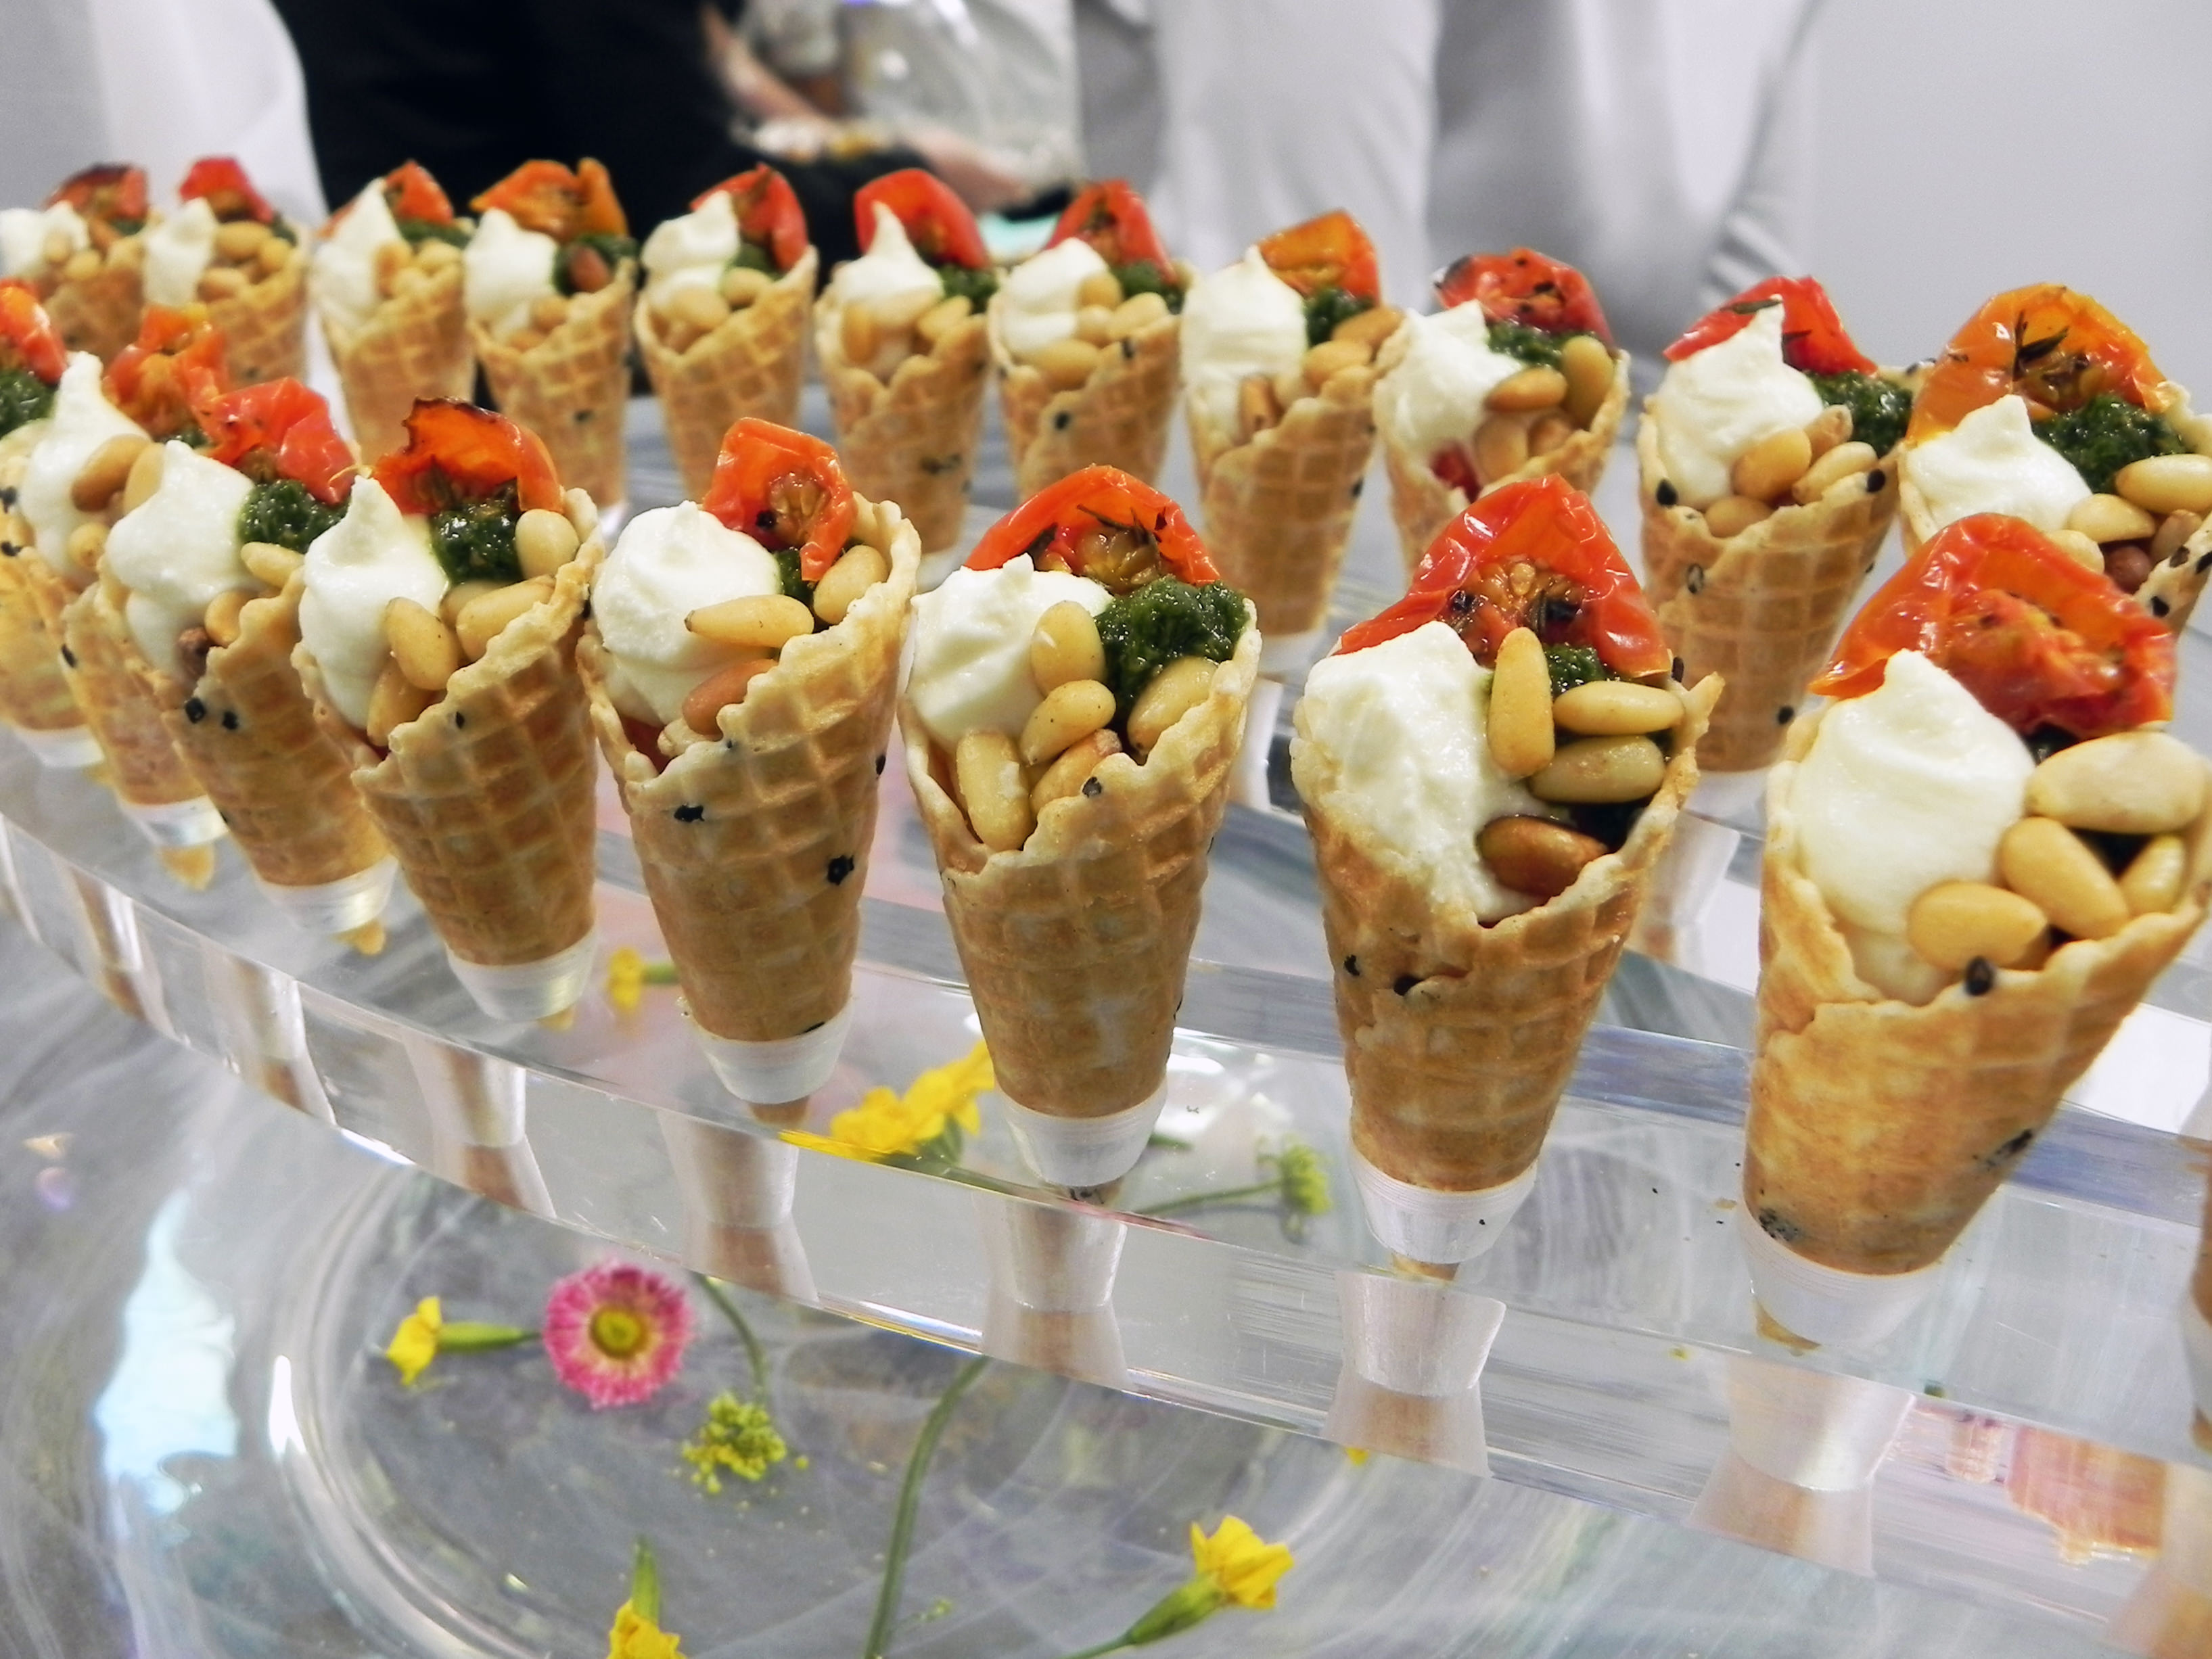 Caprini Goat's Cheese Canapes at Victoria Gate Launch